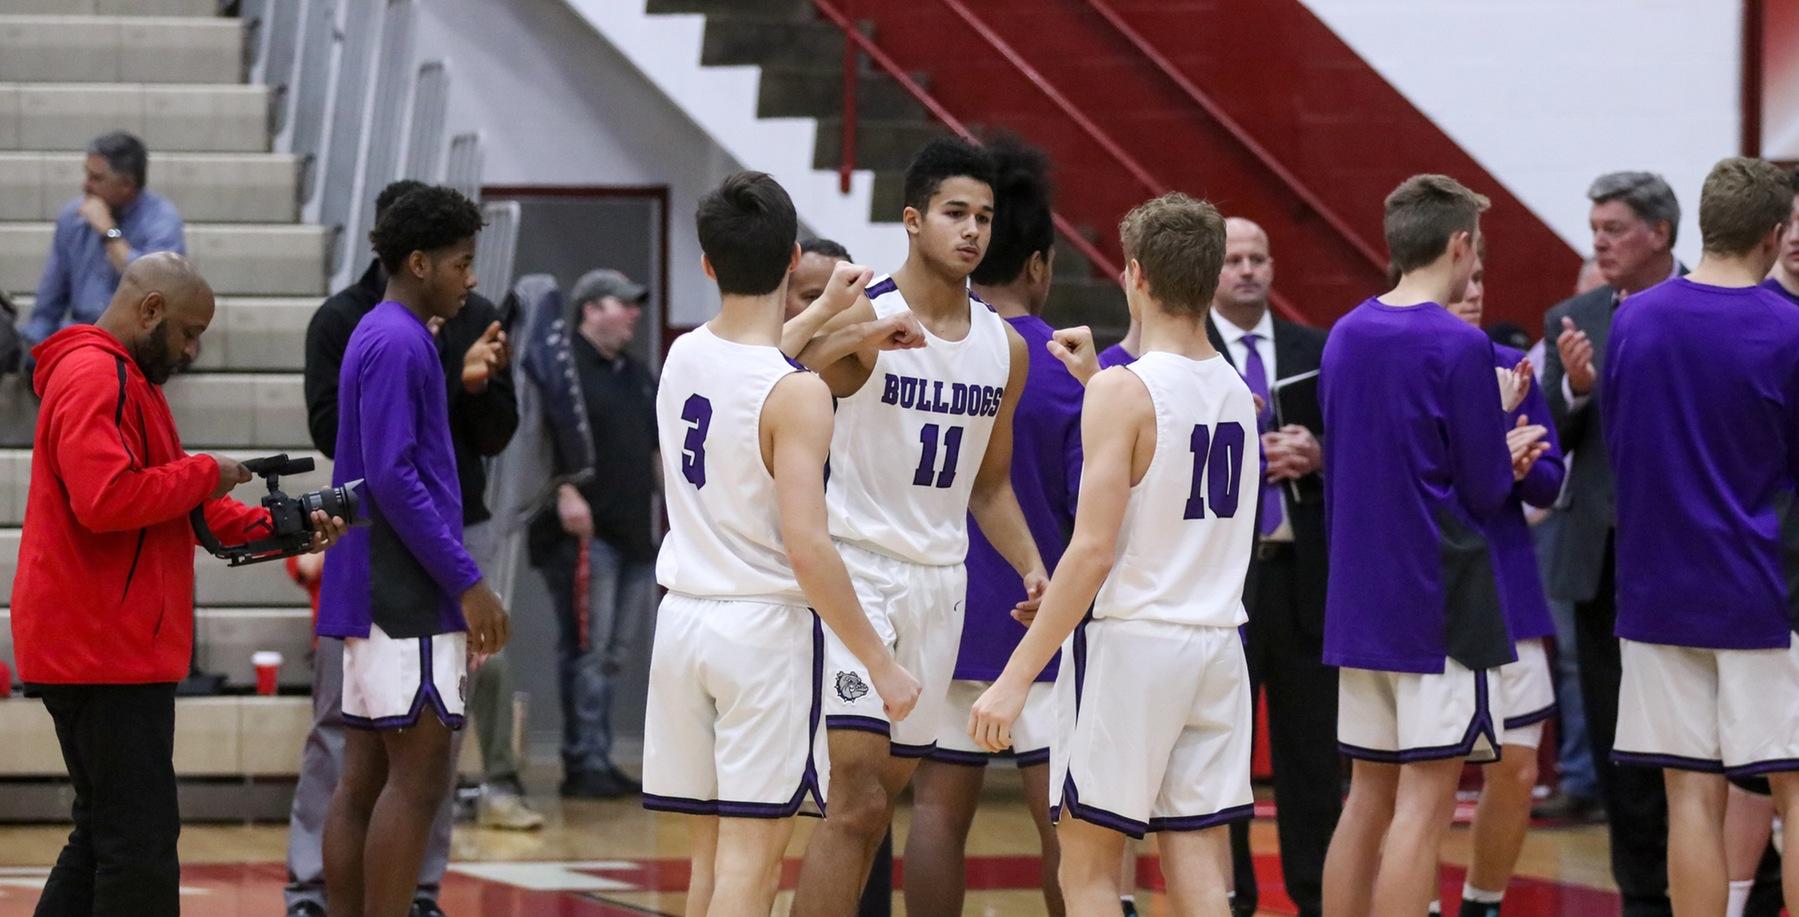 @bhsdogsbhoops Dominate at Terre Haute South, 61-36